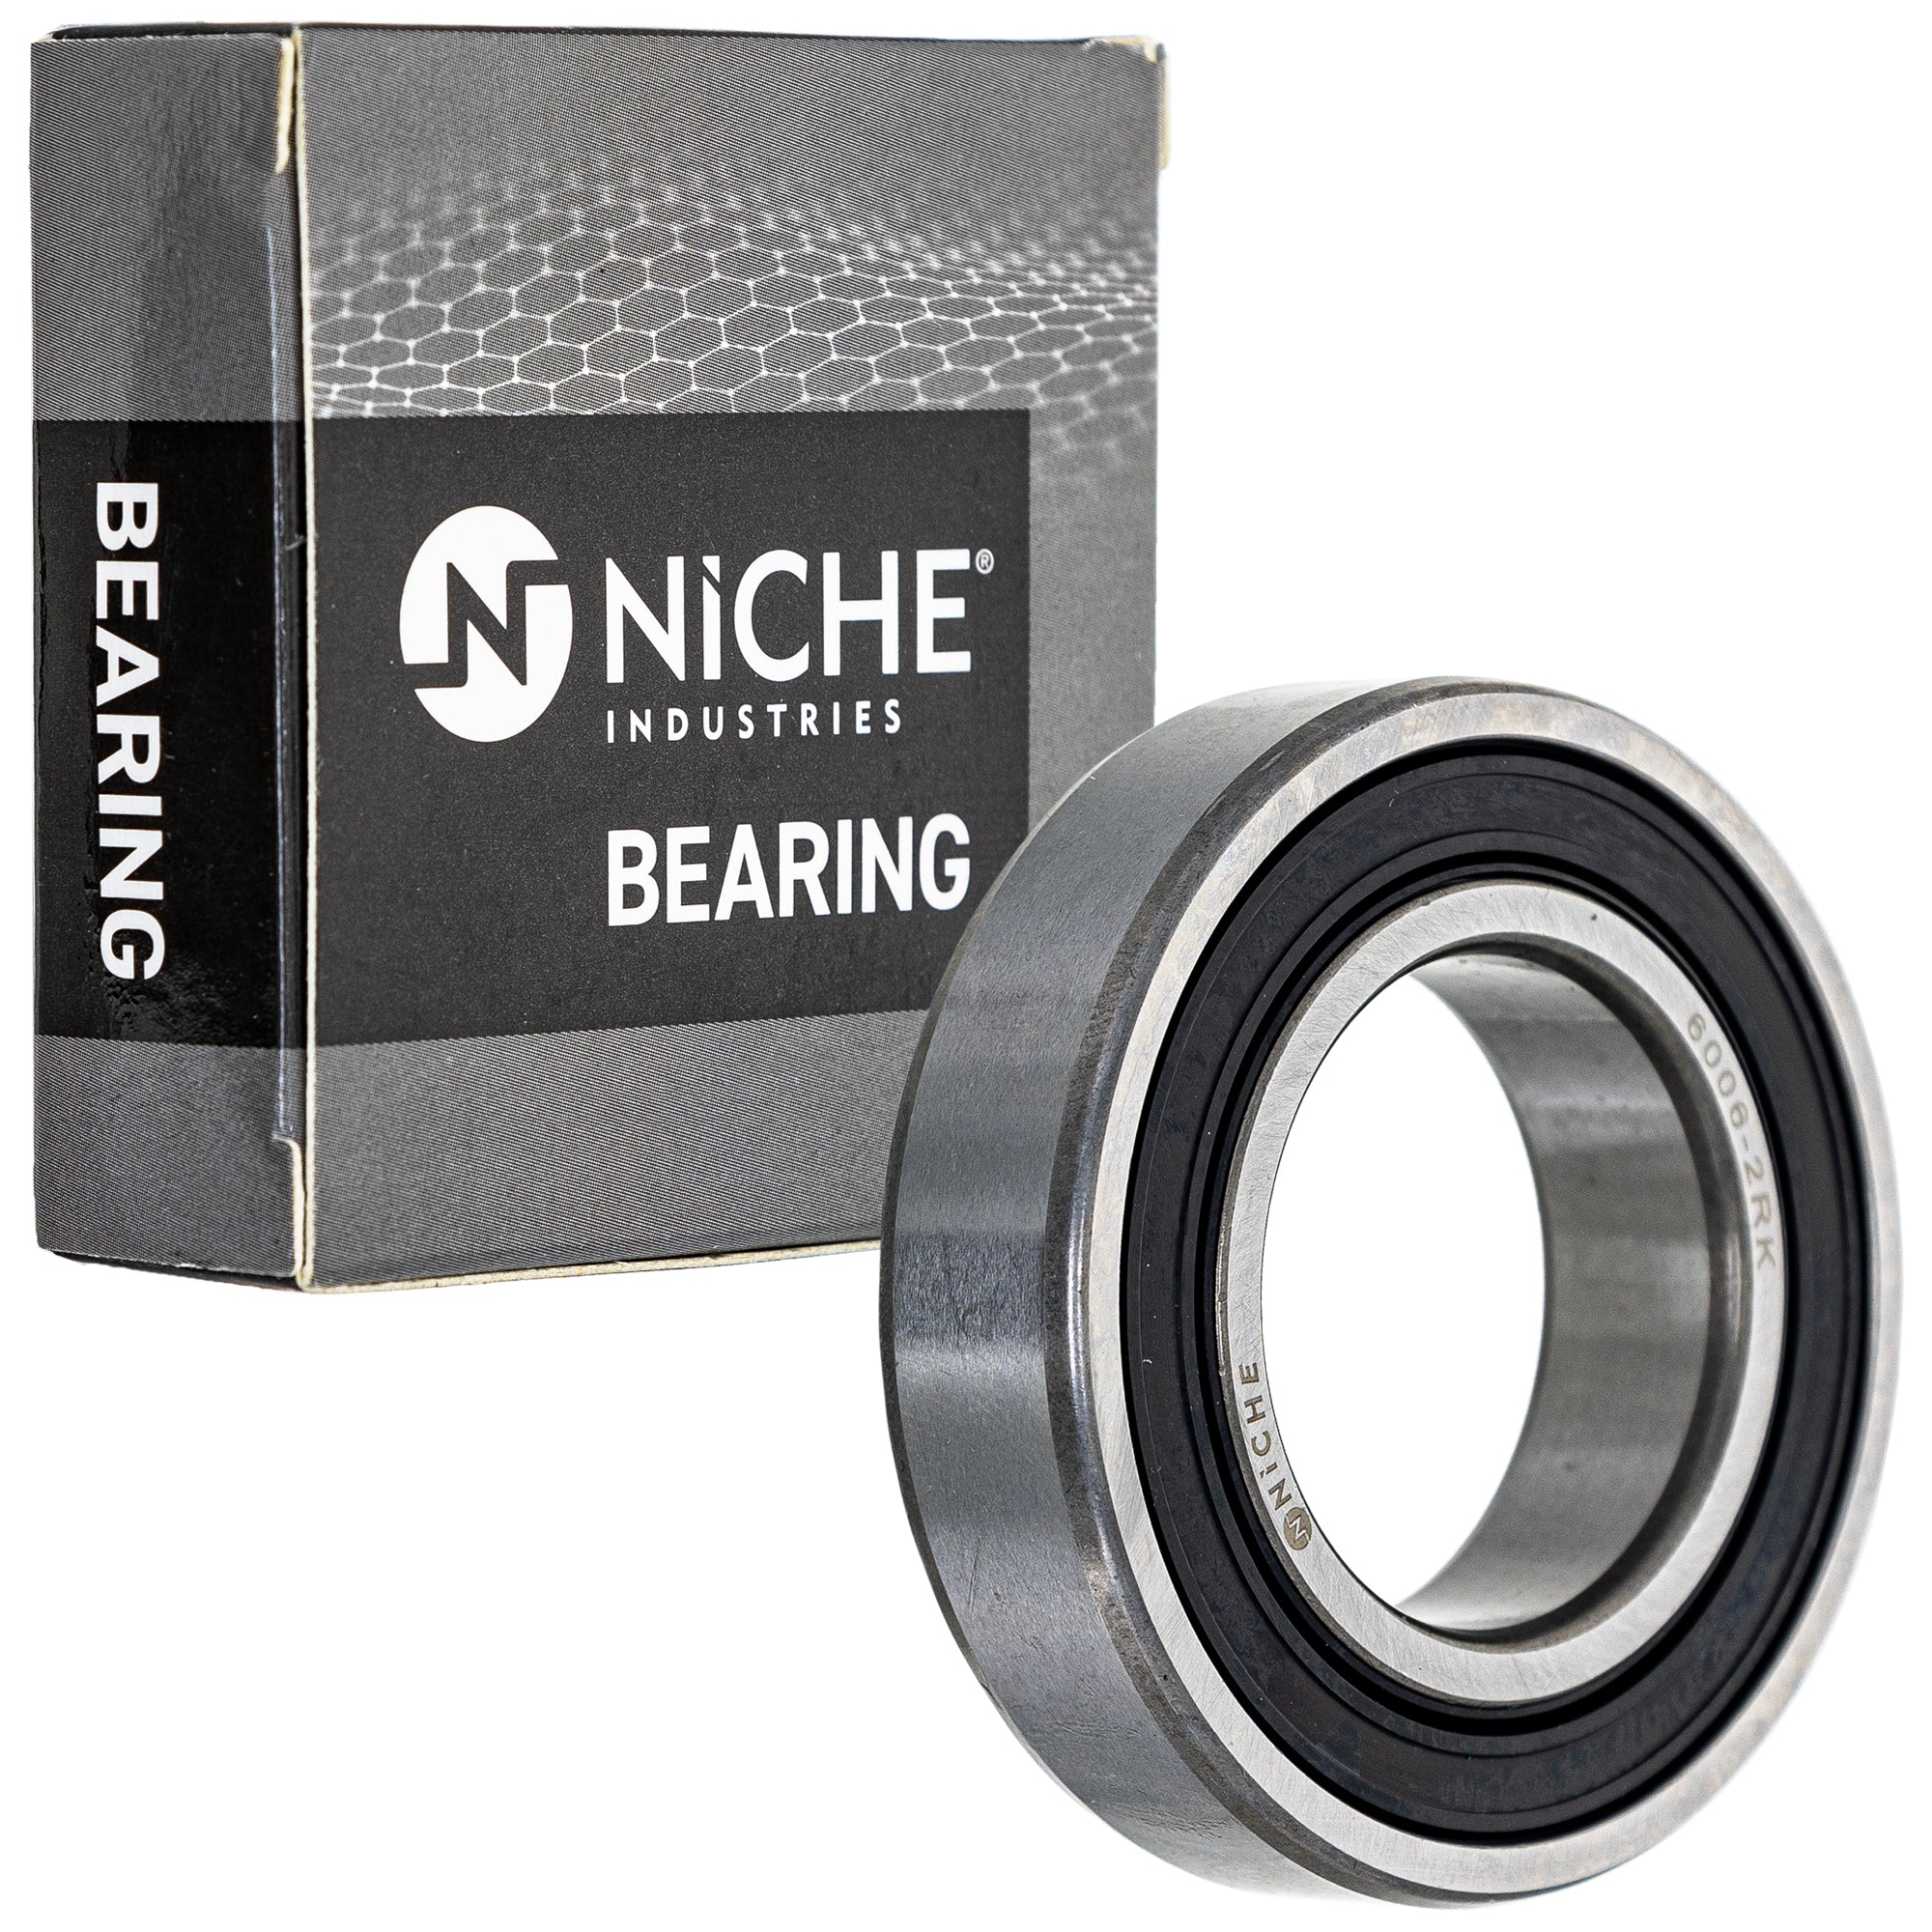 NICHE 519-CBB2218R Bearing 2-Pack for zOTHER Arctic Cat Textron YFZ50